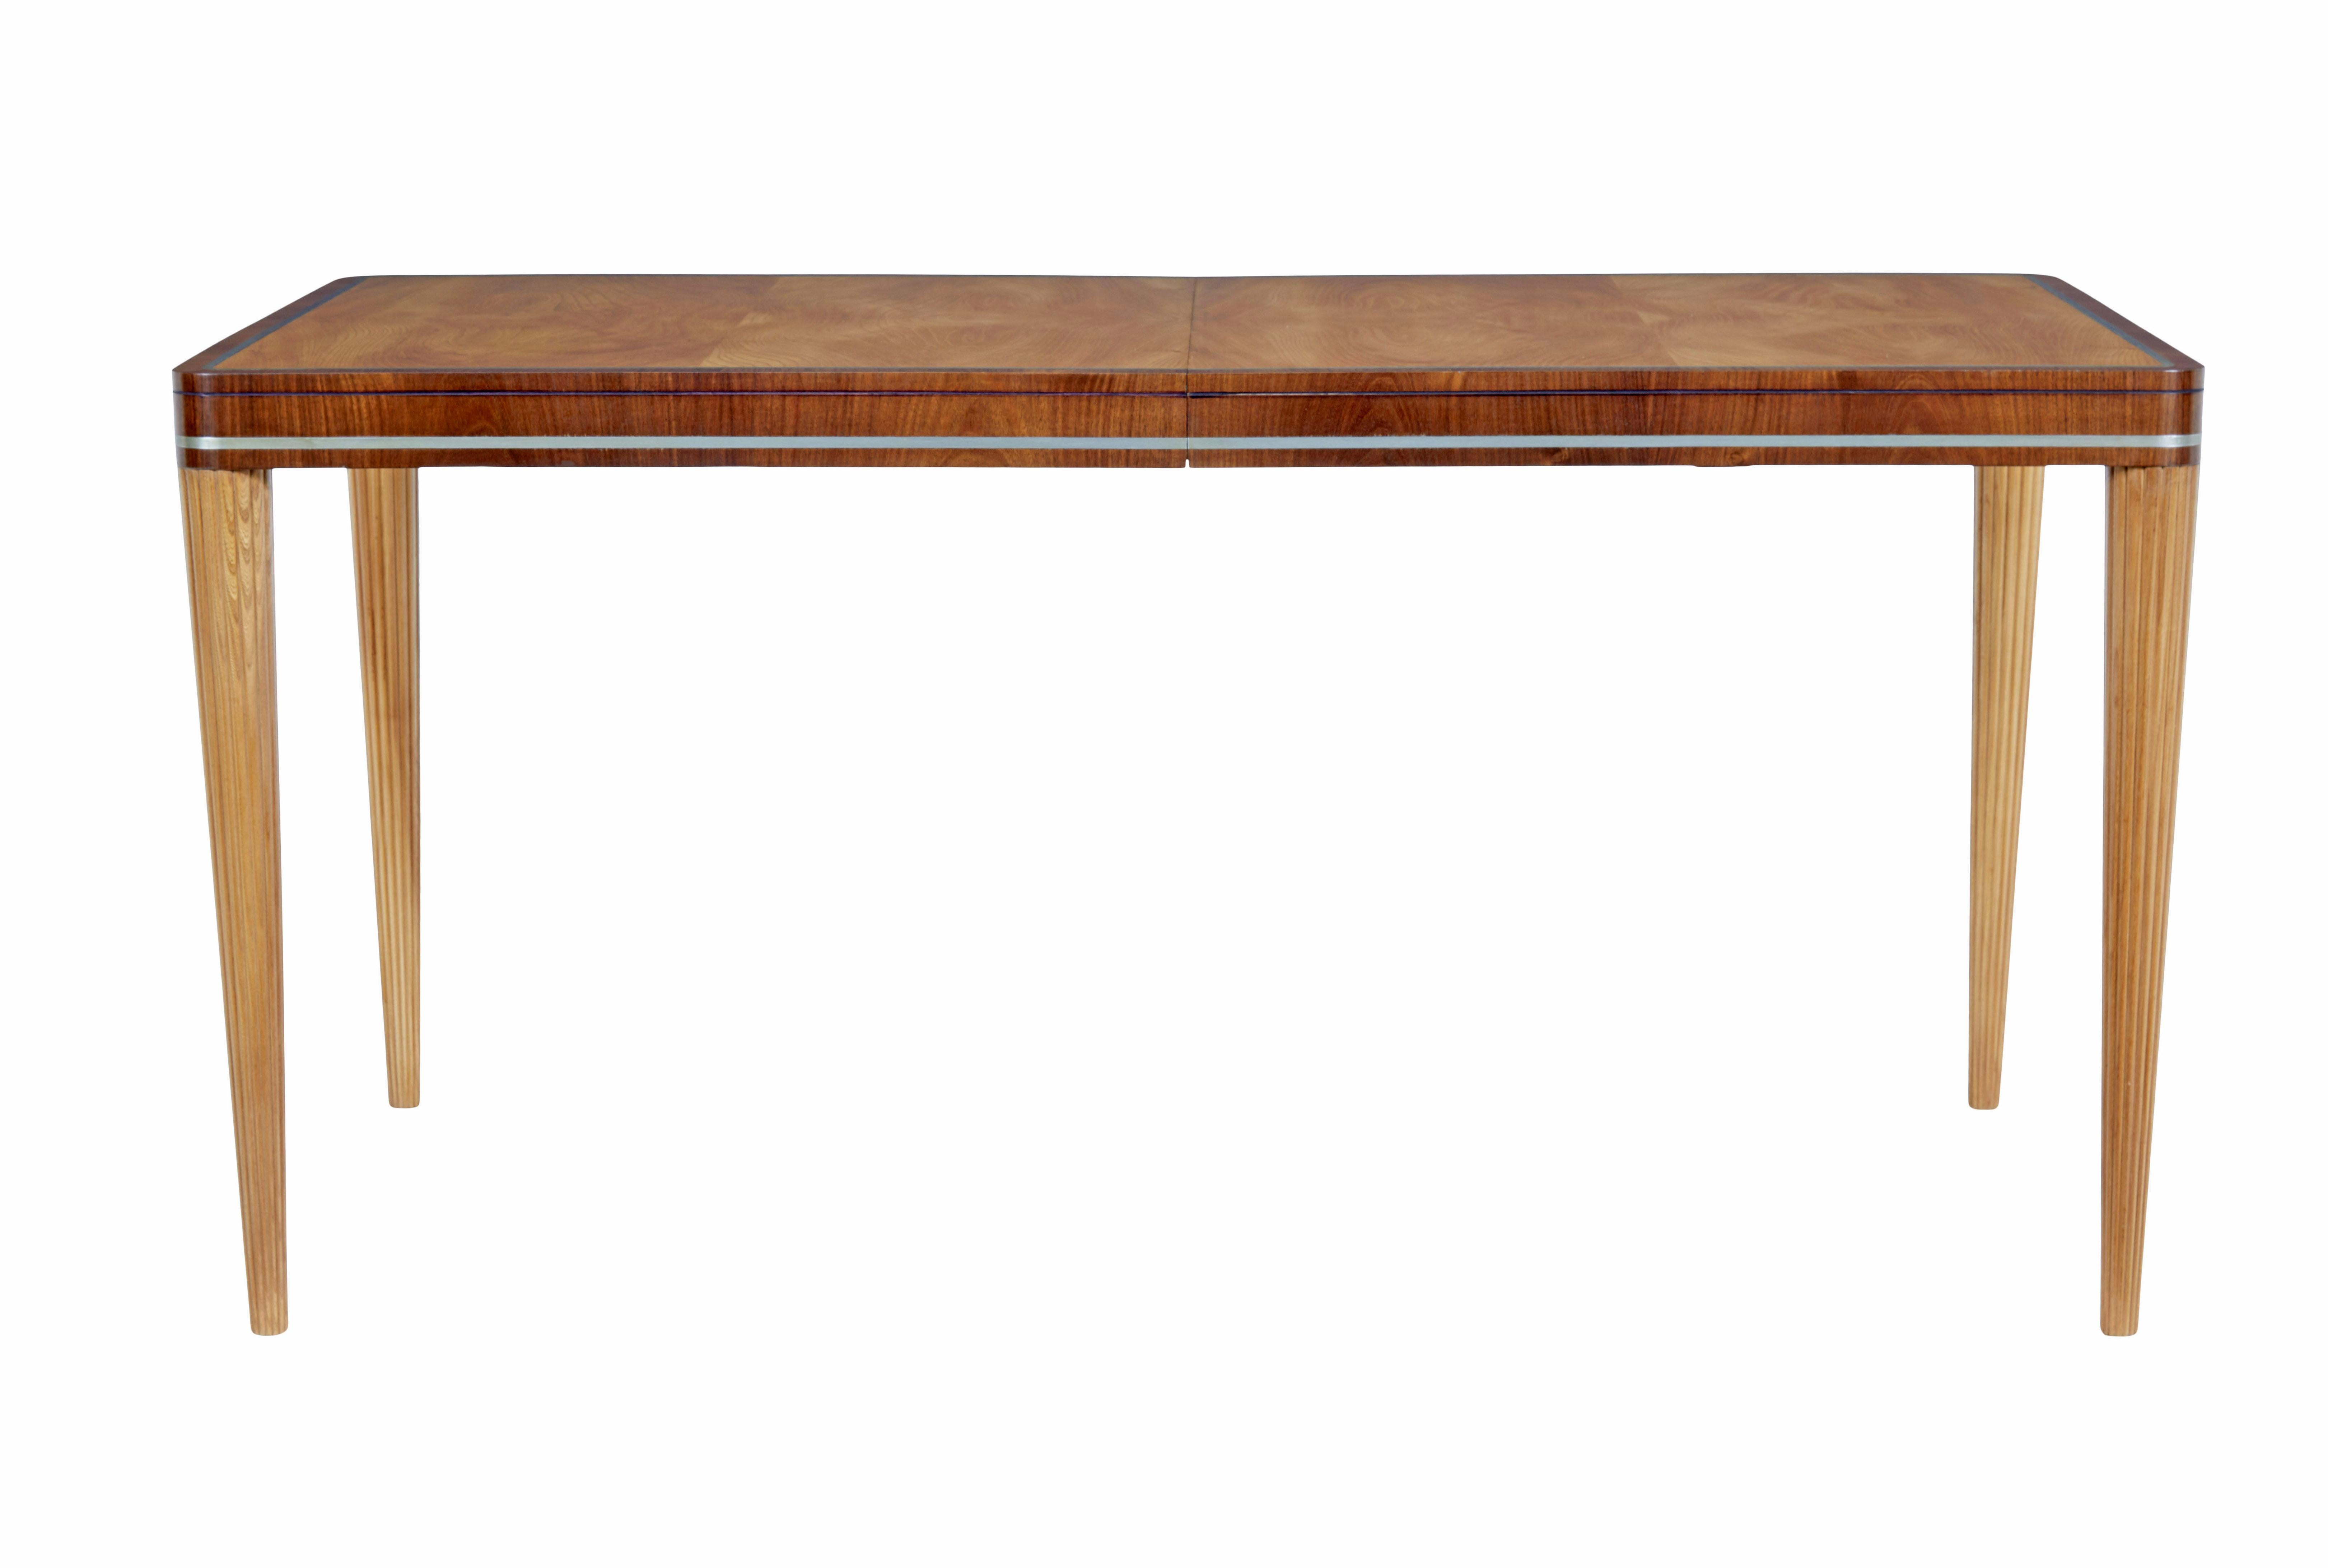 Mid 20th century elm and mahogany table by Carl Bergsten circa 1930.

Beautiful table by well respected Swedish designer carl bergsten (1879-1935)

This table is able to extend, but is currently fixed closed, there is no leaf.  This lends itself